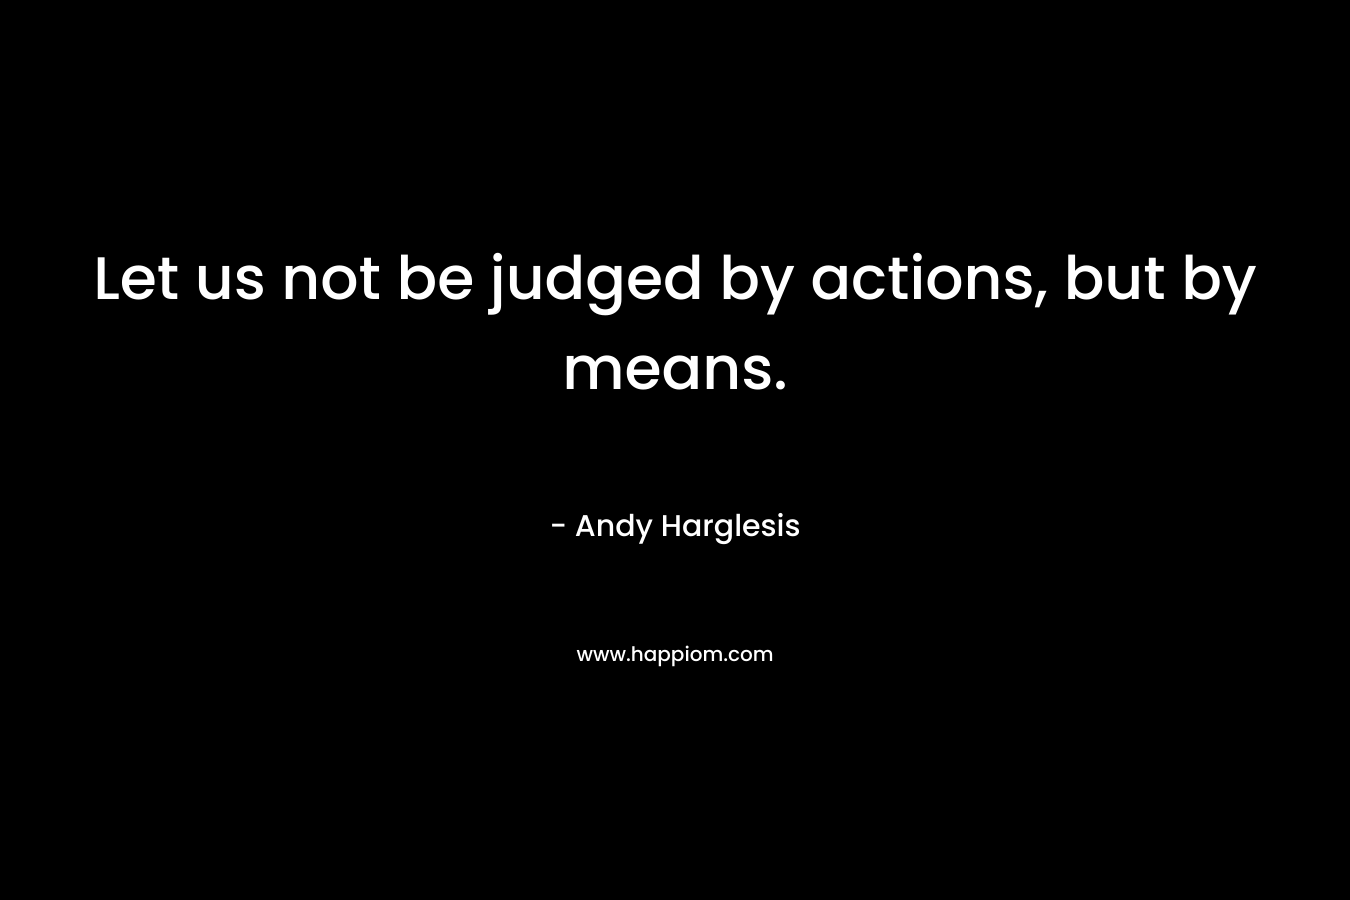 Let us not be judged by actions, but by means.